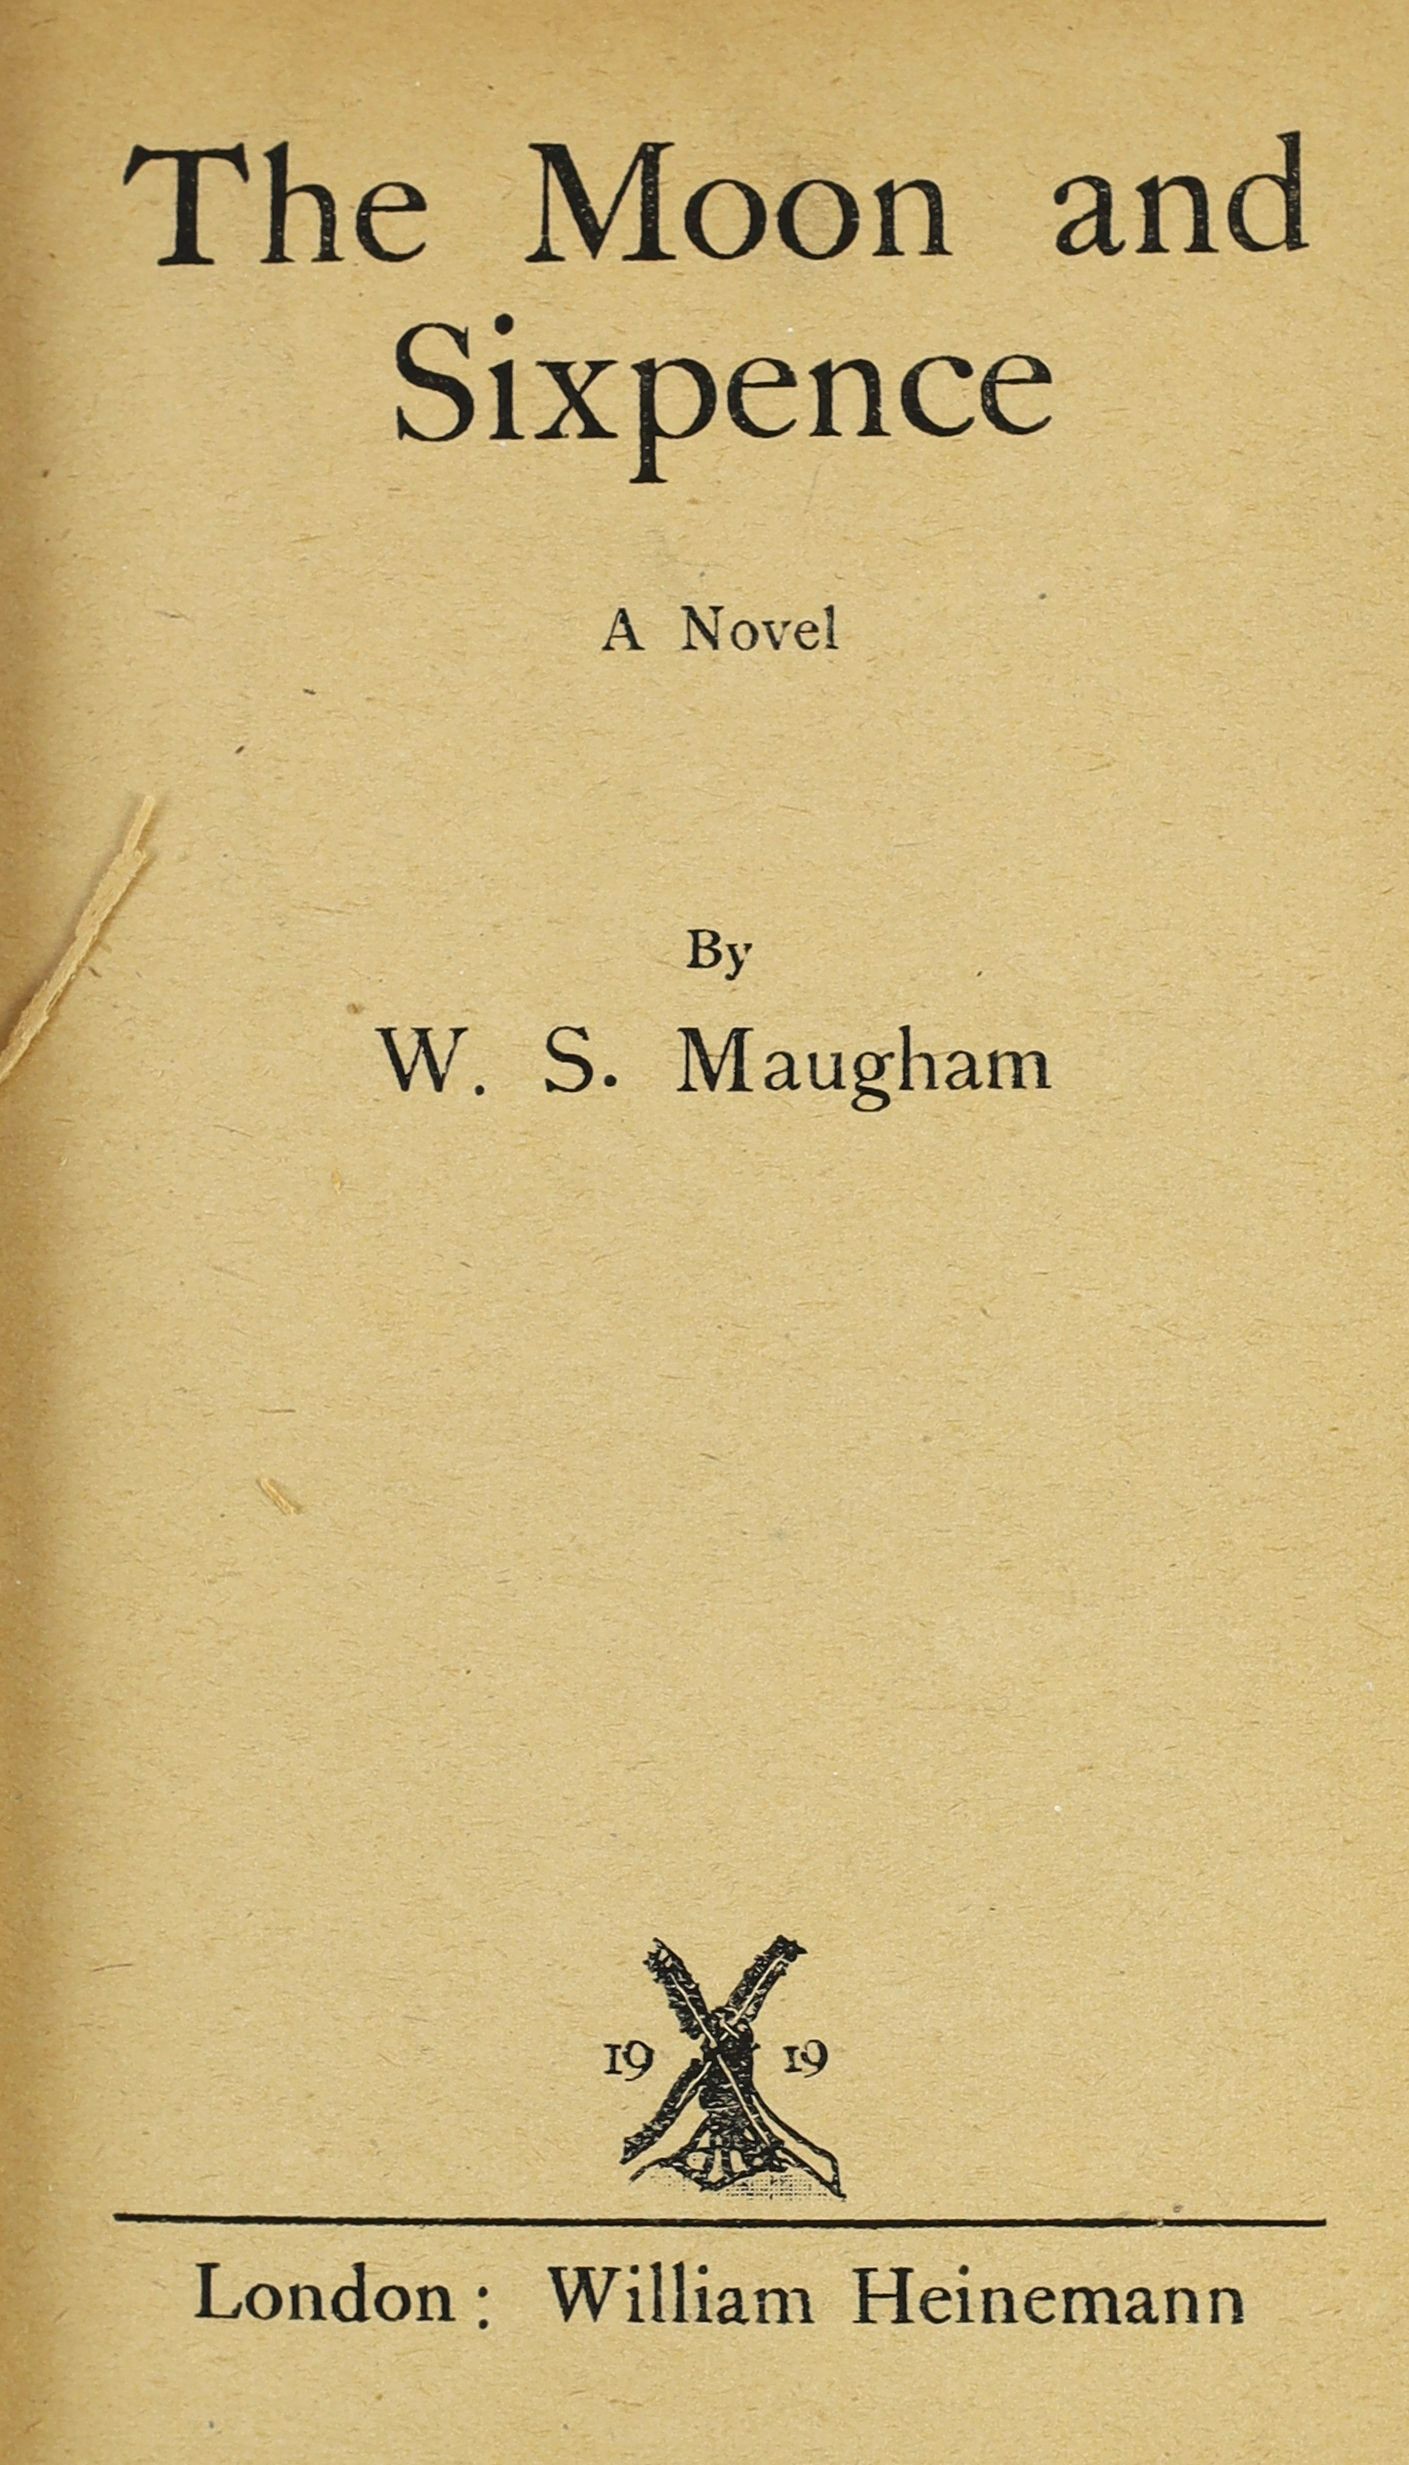 Maugham, William Somerset - The Moon and Sixpence, 1st edition, 8vo, quarter calf, William Heinemann, London, 1919